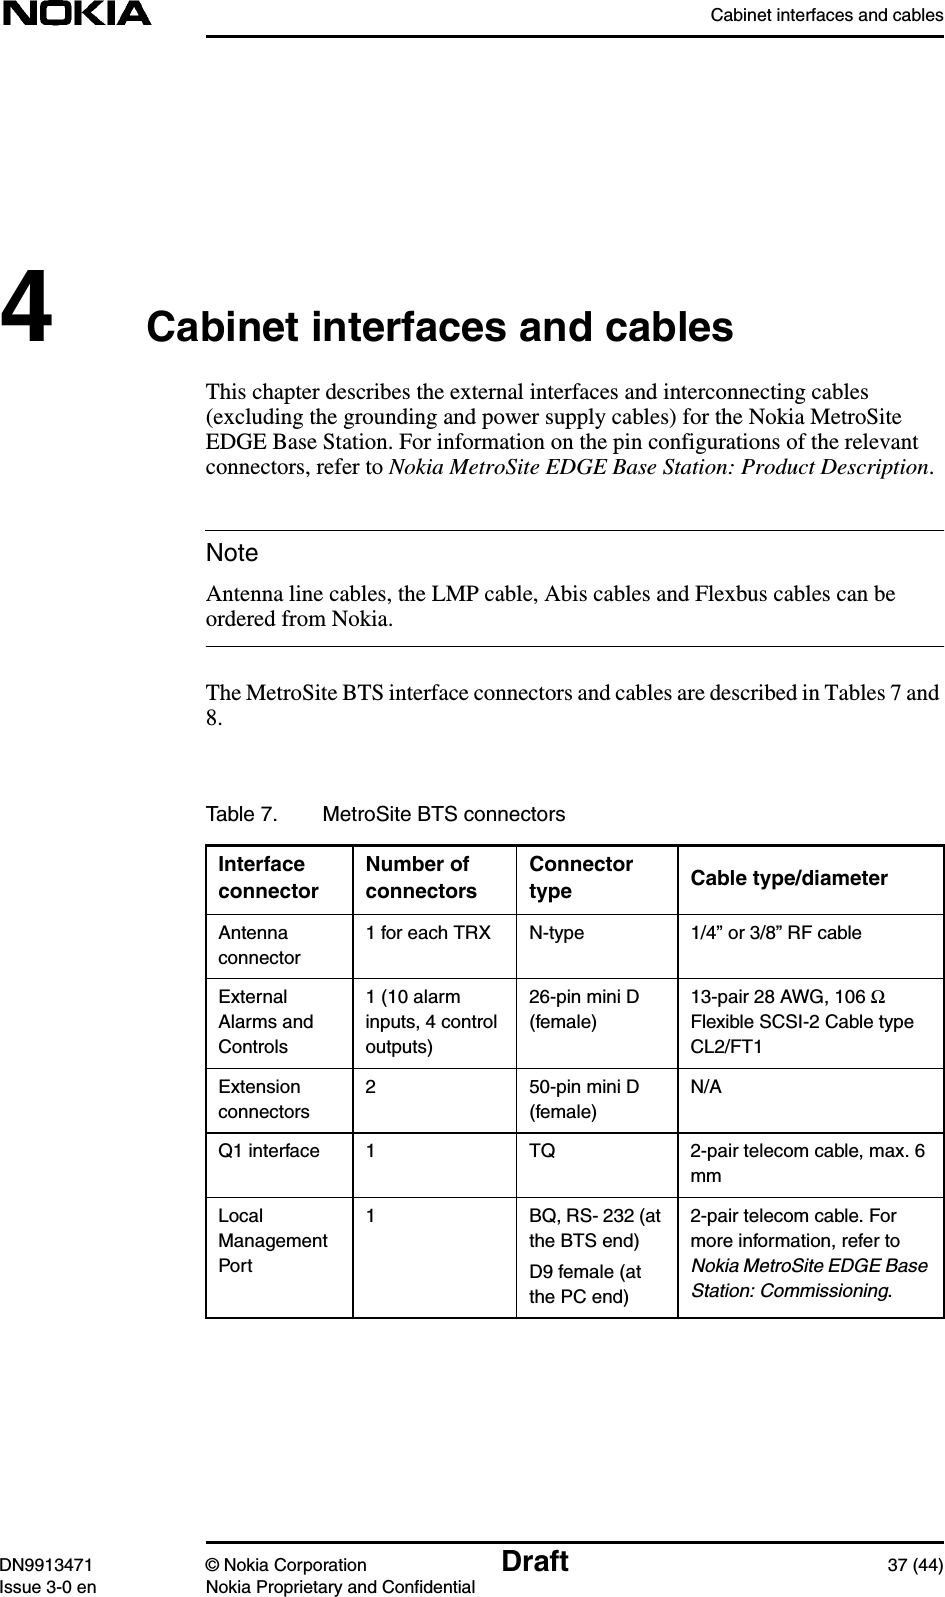 Cabinet interfaces and cablesDN9913471 © Nokia Corporation Draft 37 (44)Issue 3-0 en Nokia Proprietary and ConfidentialNote4Cabinet interfaces and cablesThis chapter describes the external interfaces and interconnecting cables(excluding the grounding and power supply cables) for the Nokia MetroSiteEDGE Base Station. For information on the pin configurations of the relevantconnectors, refer to Nokia MetroSite EDGE Base Station: Product Description.Antenna line cables, the LMP cable, Abis cables and Flexbus cables can beordered from Nokia.The MetroSite BTS interface connectors and cables are described in Tables 7 and8.Table 7. MetroSite BTS connectorsInterfaceconnectorNumber ofconnectorsConnectortype Cable type/diameterAntennaconnector1 for each TRX N-type 1/4” or 3/8” RF cableExternalAlarms andControls1 (10 alarminputs, 4 controloutputs)26-pin mini D(female)13-pair 28 AWG, 106 ΩFlexible SCSI-2 Cable typeCL2/FT1Extensionconnectors2 50-pin mini D(female)N/AQ1 interface 1 TQ 2-pair telecom cable, max. 6mmLocalManagementPort1 BQ, RS- 232 (atthe BTS end)D9 female (atthe PC end)2-pair telecom cable. Formore information, refer toNokia MetroSite EDGE BaseStation: Commissioning.